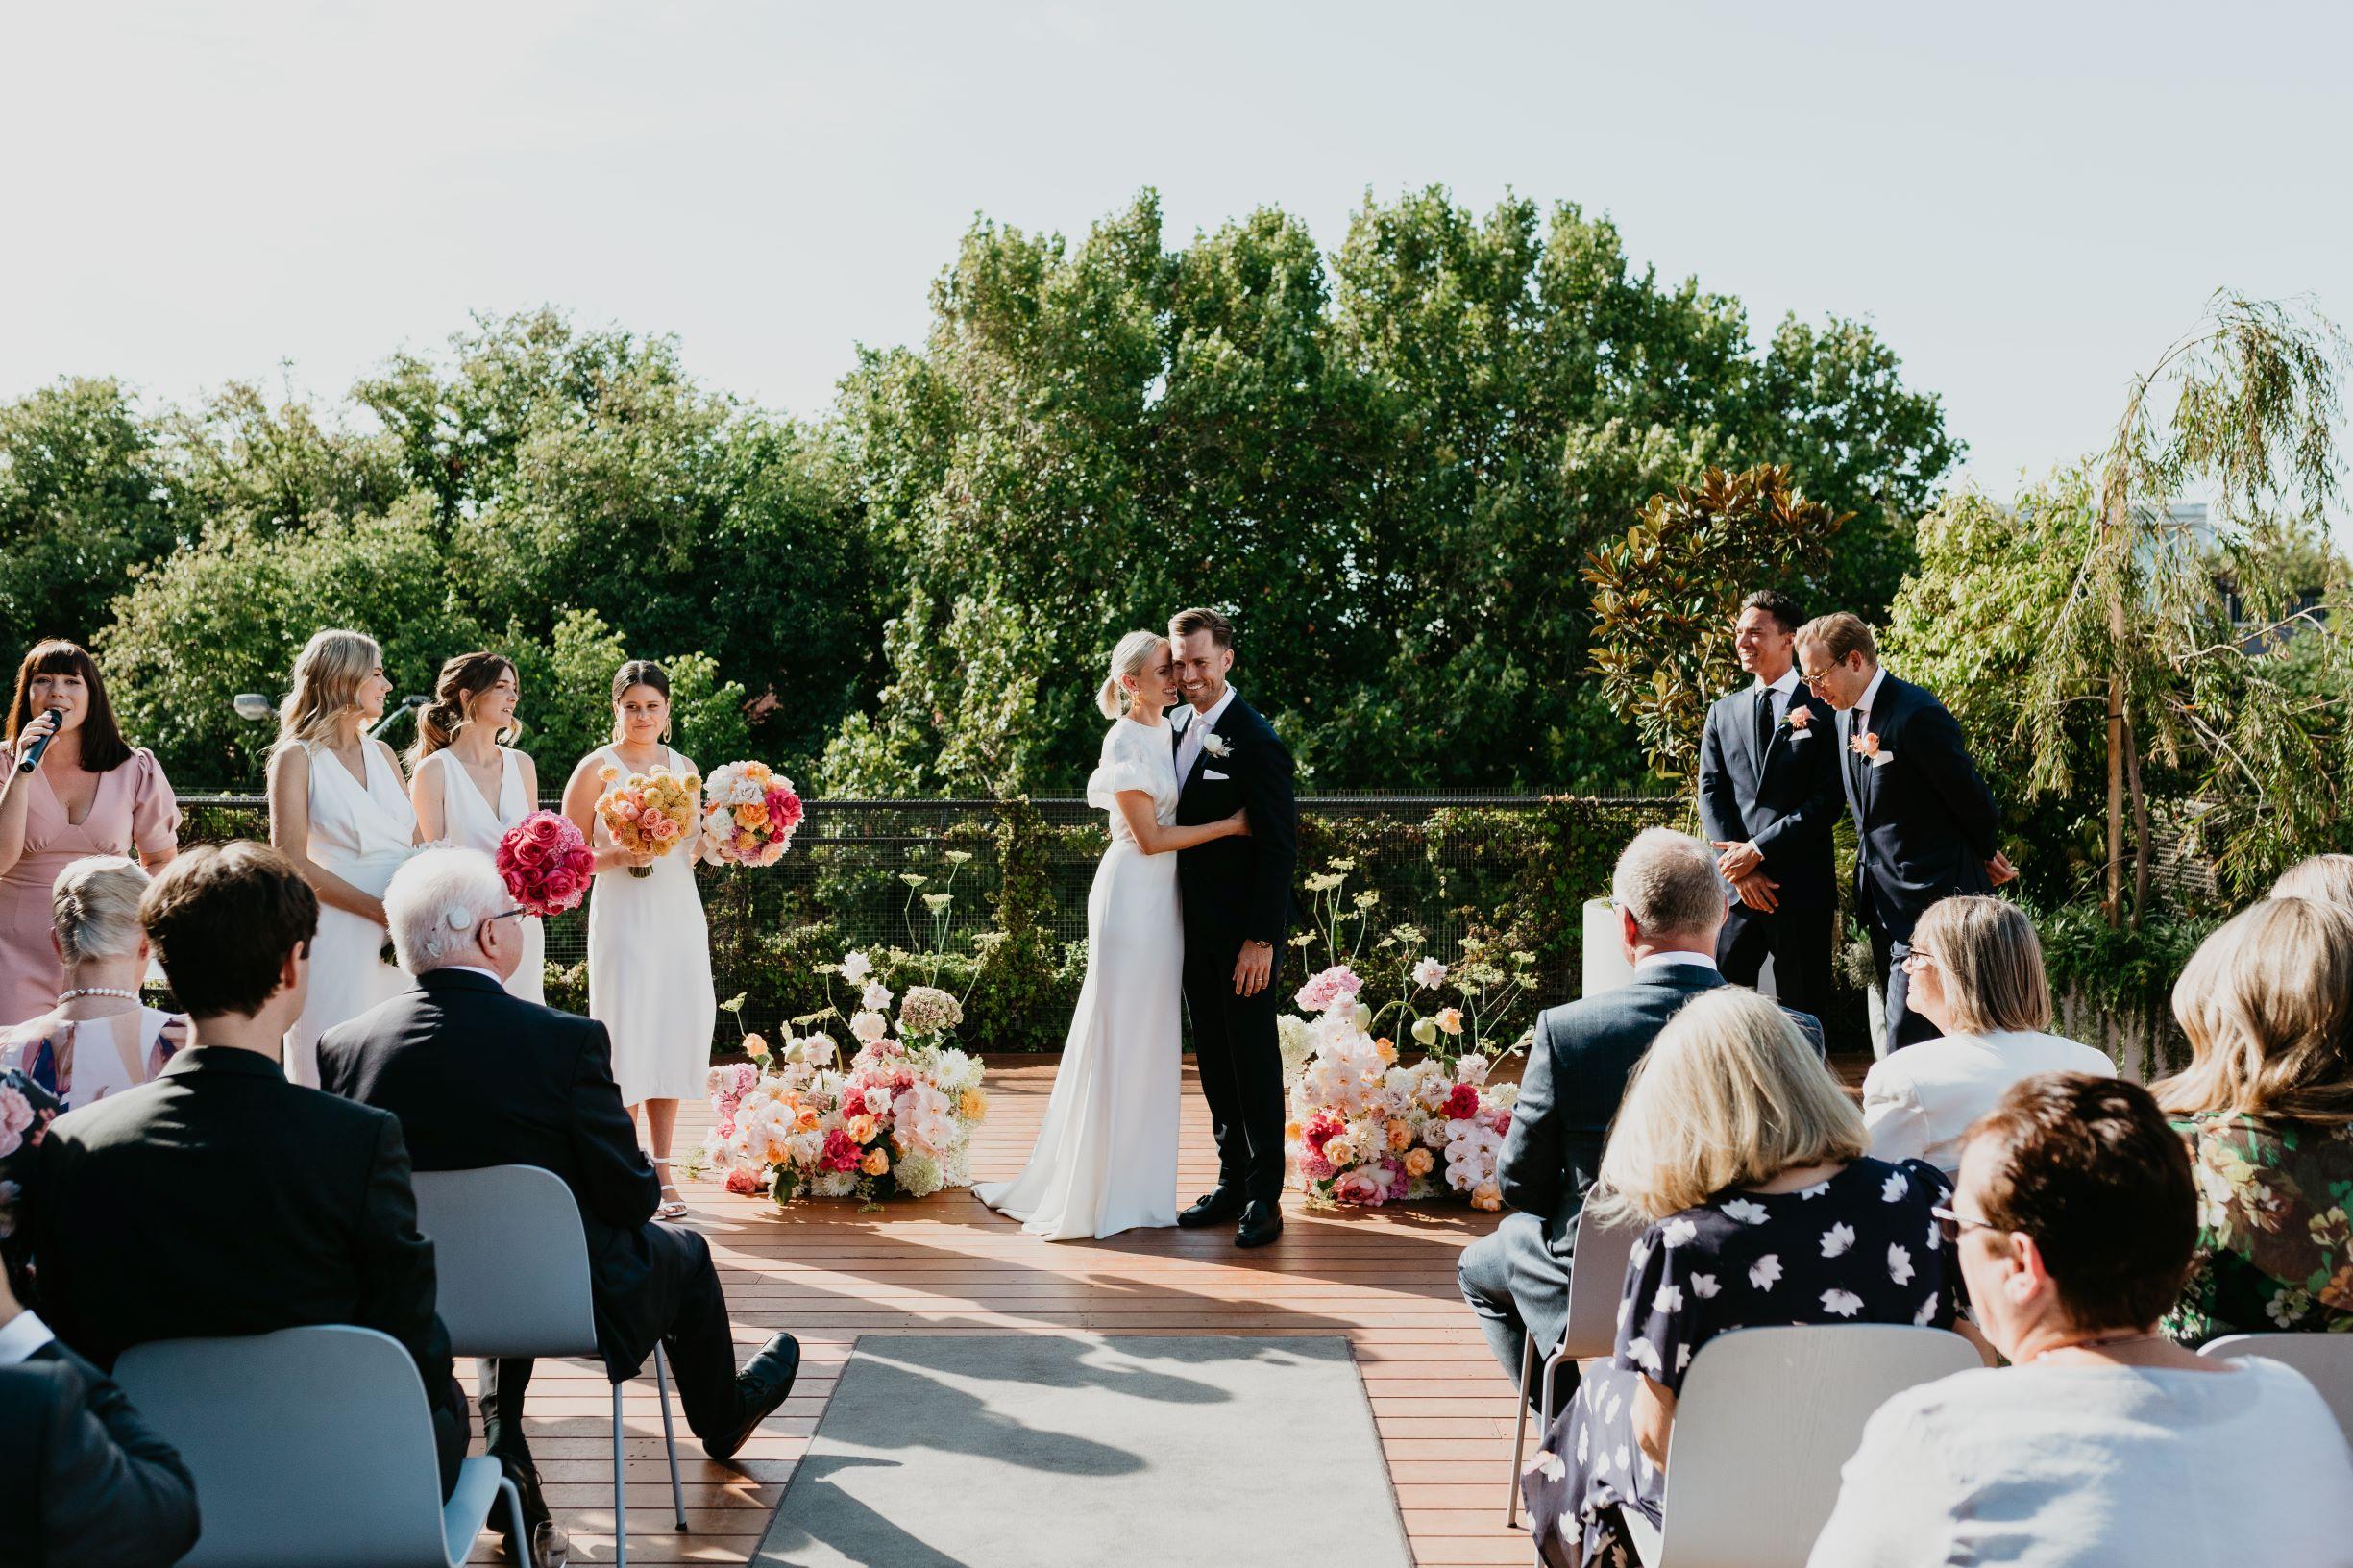 7 Things To Consider When Choosing A Venue For Your Wedding